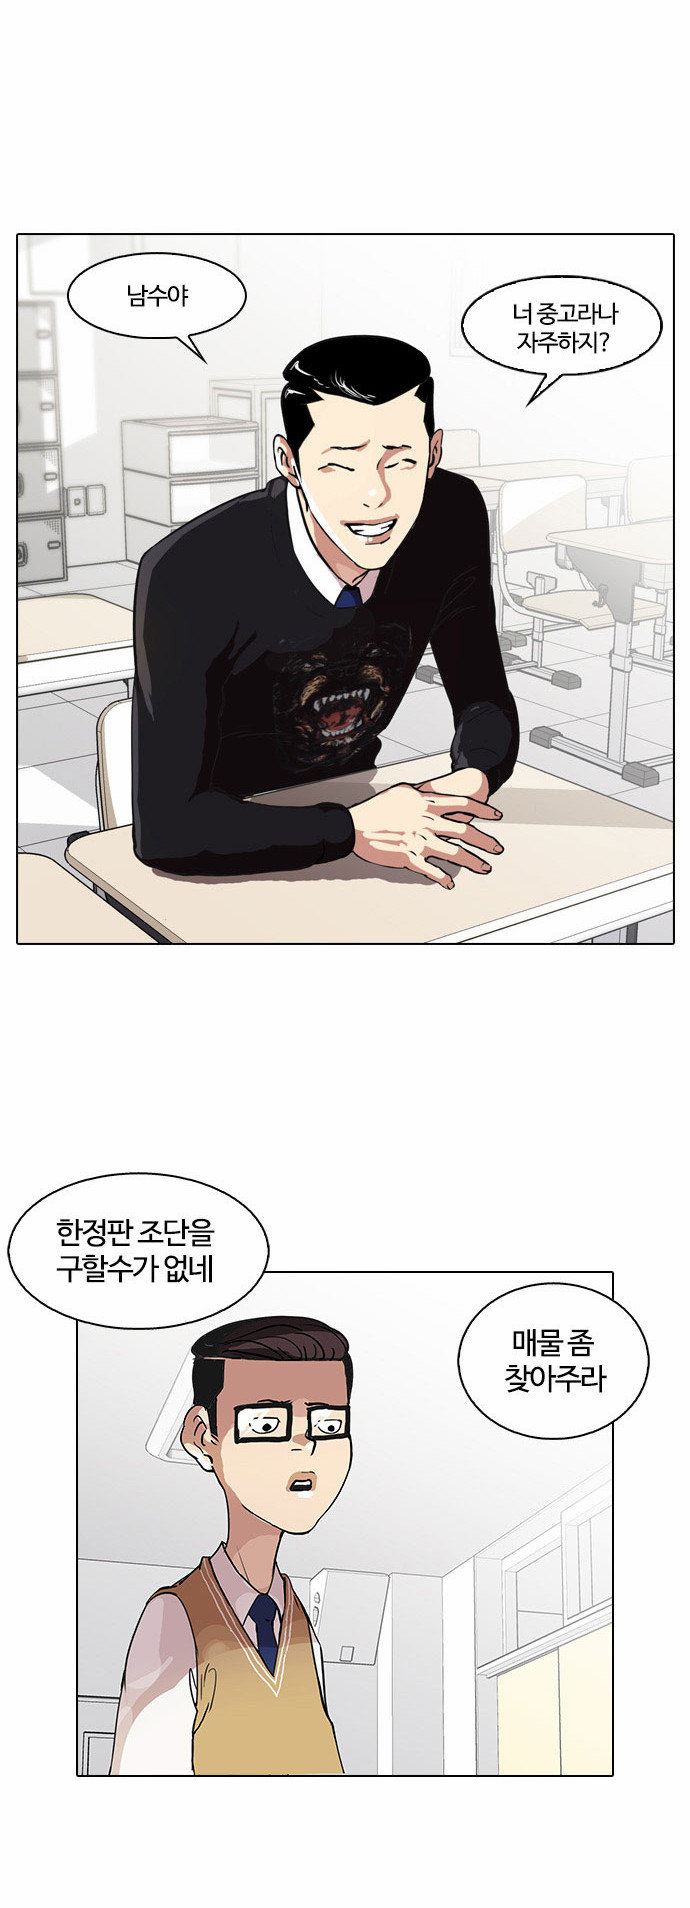 Lookism - Chapter 34 - Page 2